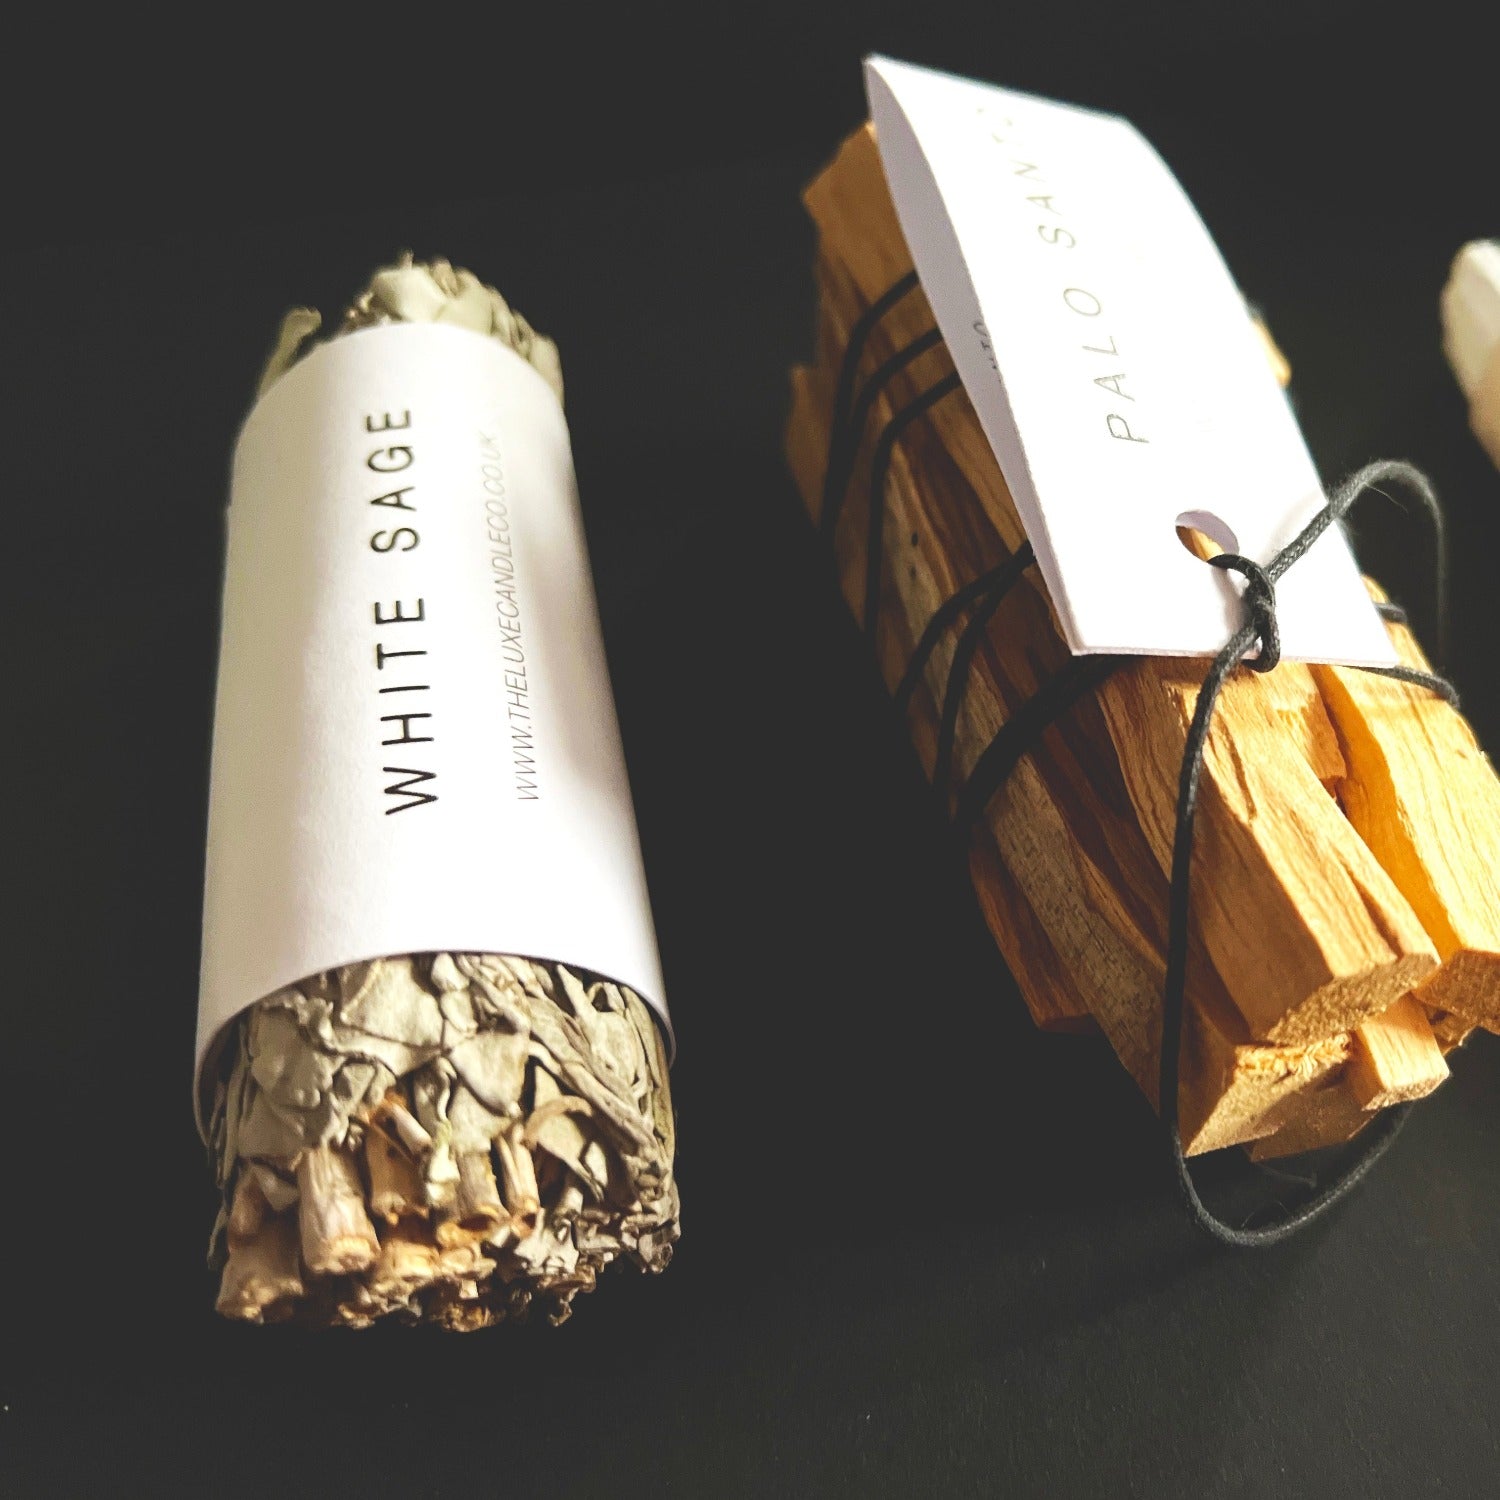 White sage smudging with sage stick - The Luxe Candle Co Wellness + Self Care Collection